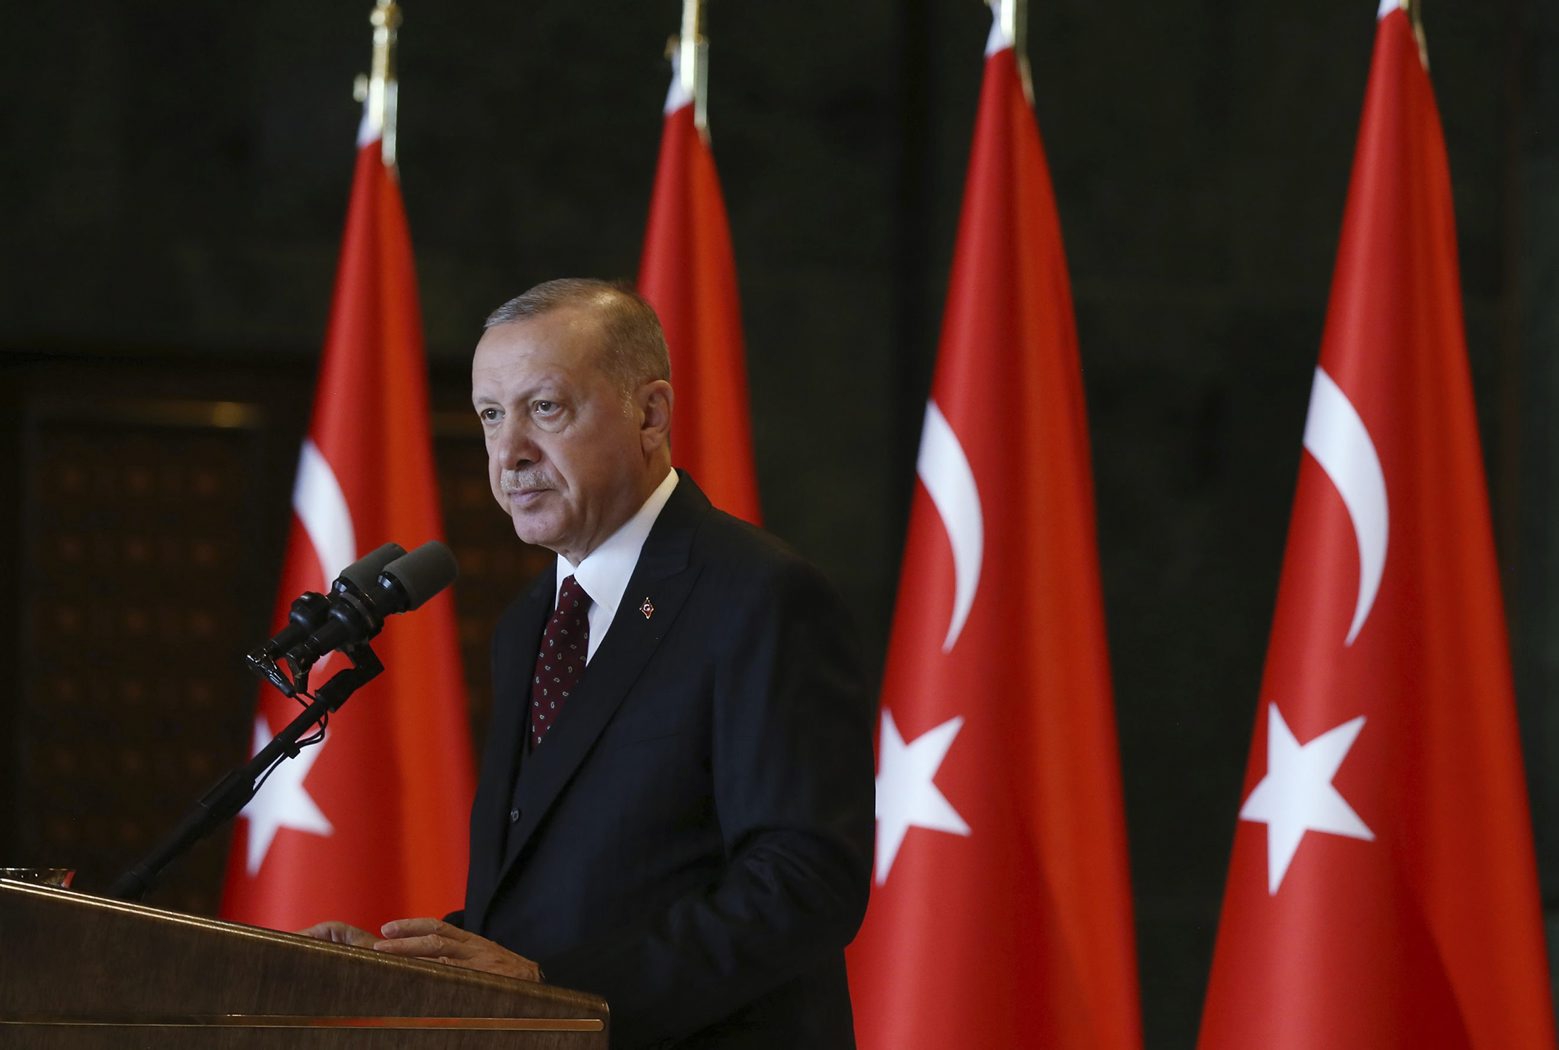 Turkey's President Recep Tayyip Erdogan addresses his country's ambassadors in Ankara, Turkey, Tuesday, Aug. 6, 2019. Turkey's combative president is threatening to launch a military operation in northeastern Syria that is designed to push back U.S.-allied Syrian Kurdish forces, an invasion that carries major risks for a highly combustible region in war-devastated Syria.(Presidential Press Service via AP, Pool) Turkey Syria